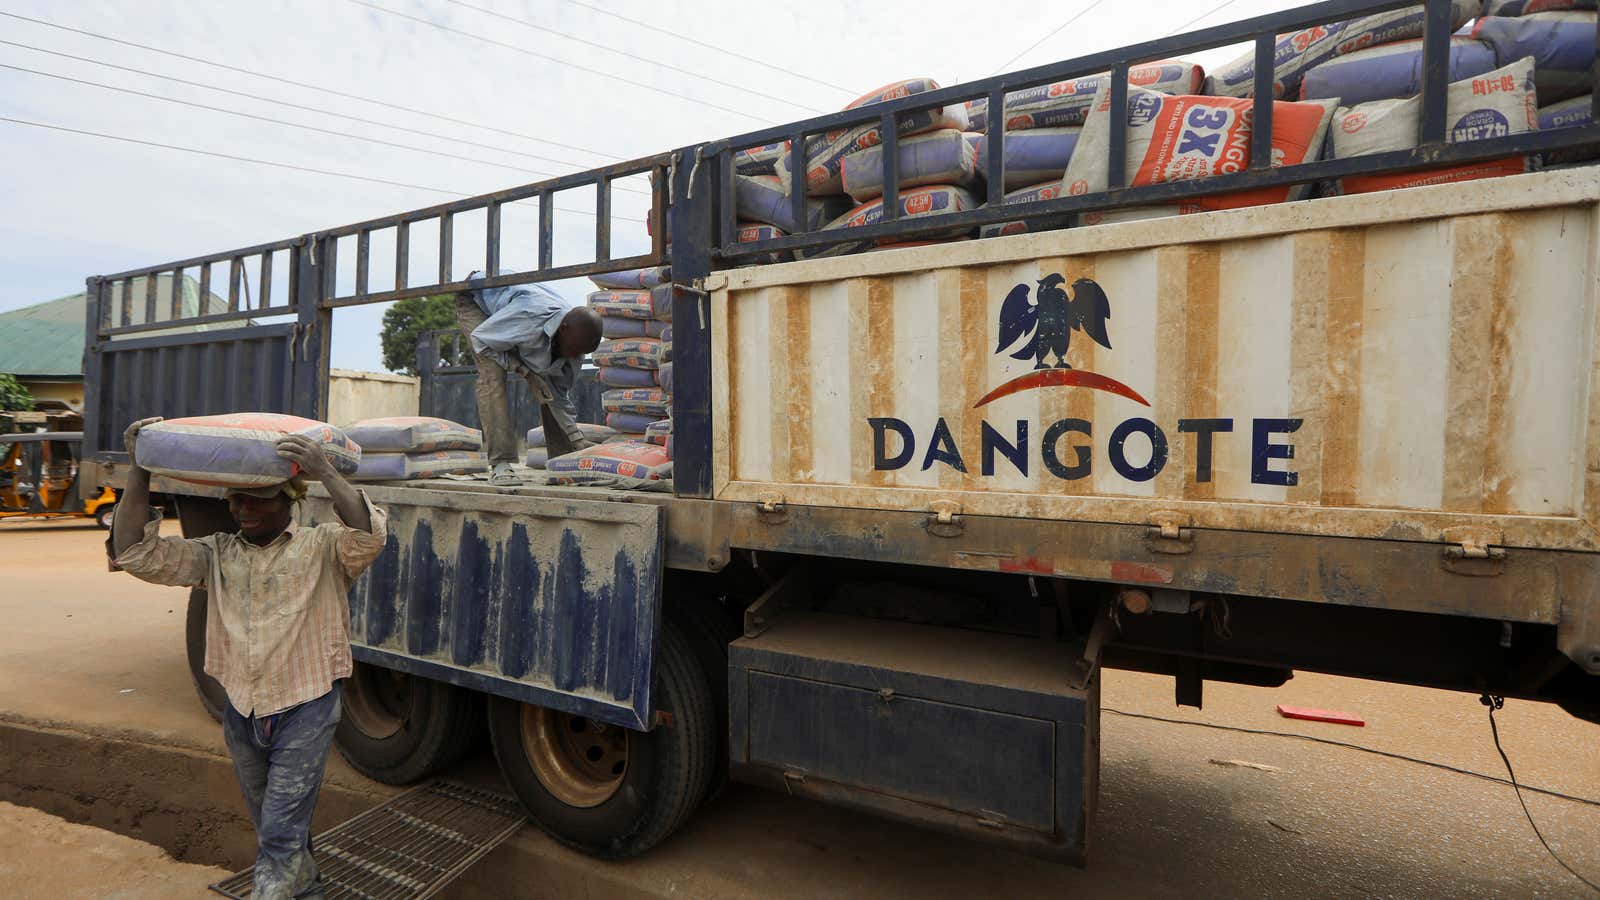 Dangote Cement, headquartered in Nigeria, is among the major global carbon polluters that lacks a credible climate strategy.